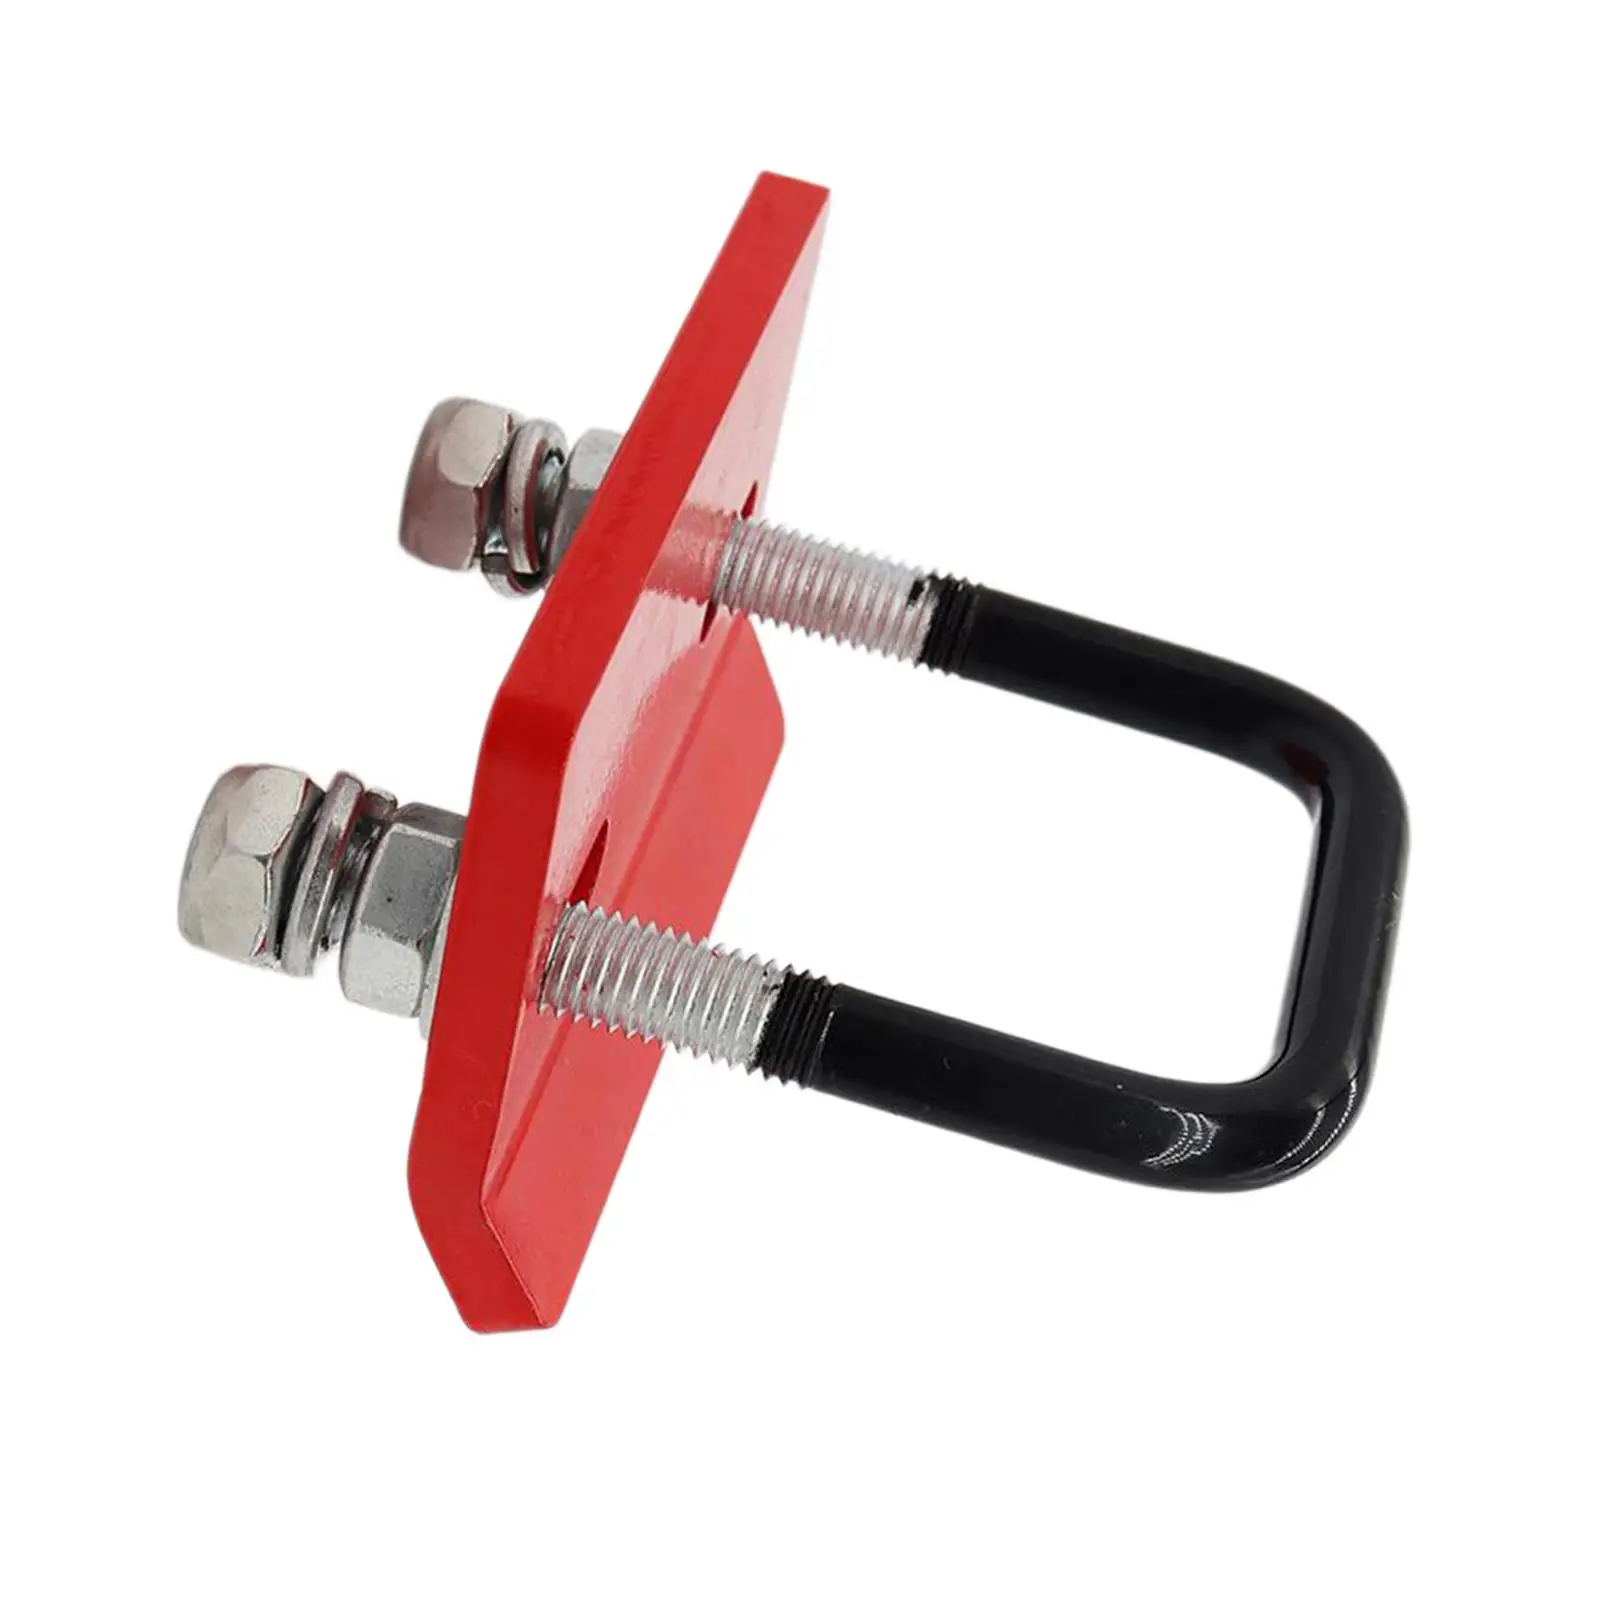 Alloy Steel Hitch Tightener Transportation Accessories Anti Rattle Stabilizer for Bike Rack Hitch Tray Boat Trailer Ball Mount